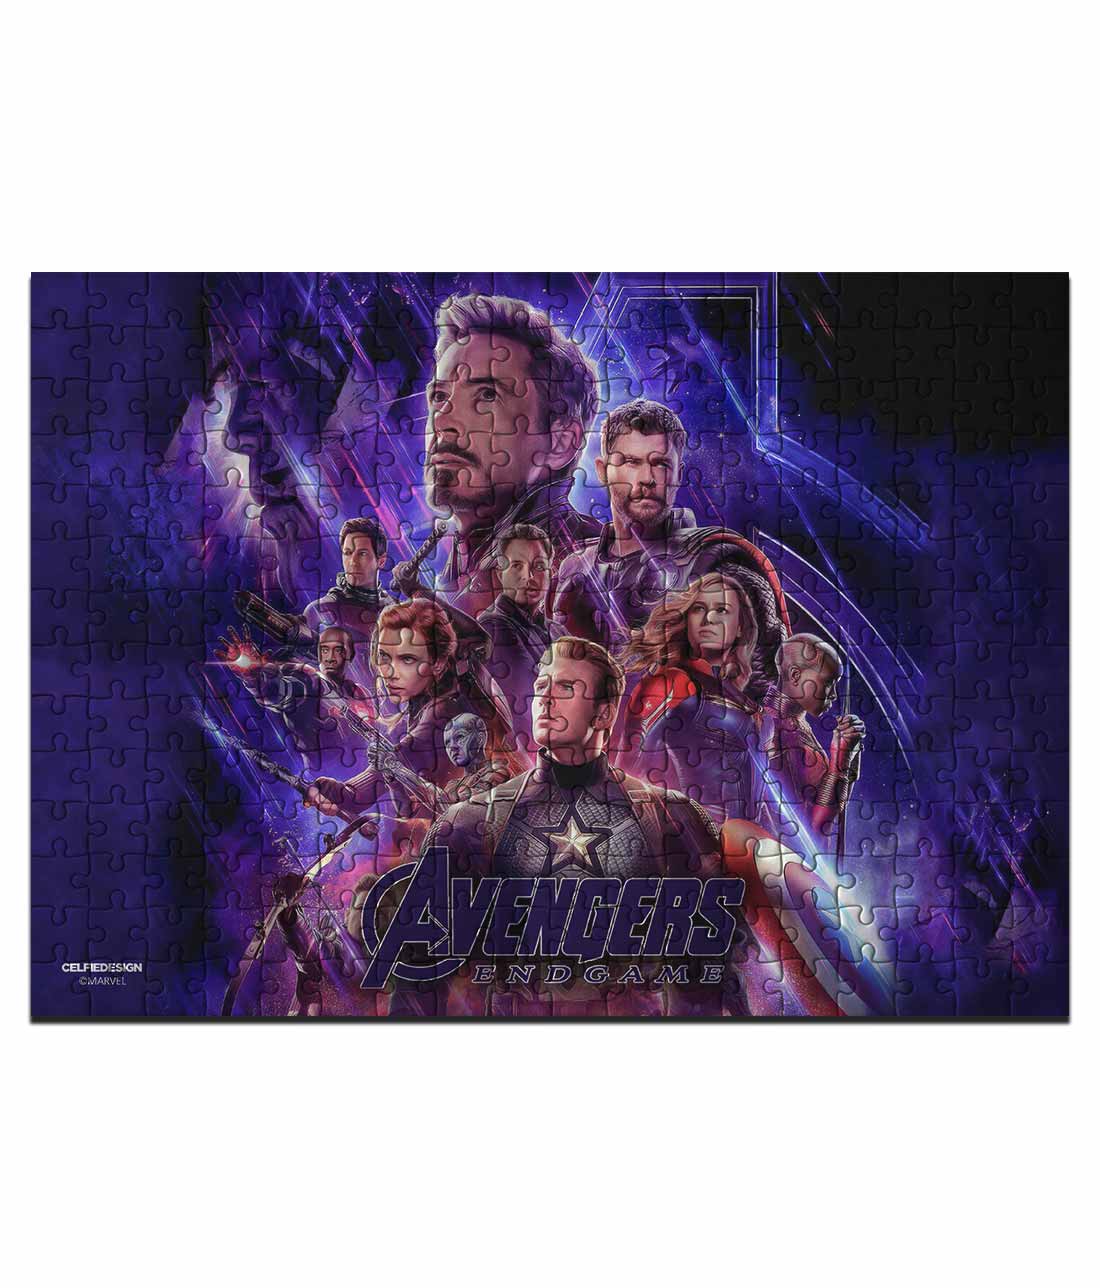 Avengers Endgame Poster - Cardboard Puzzles